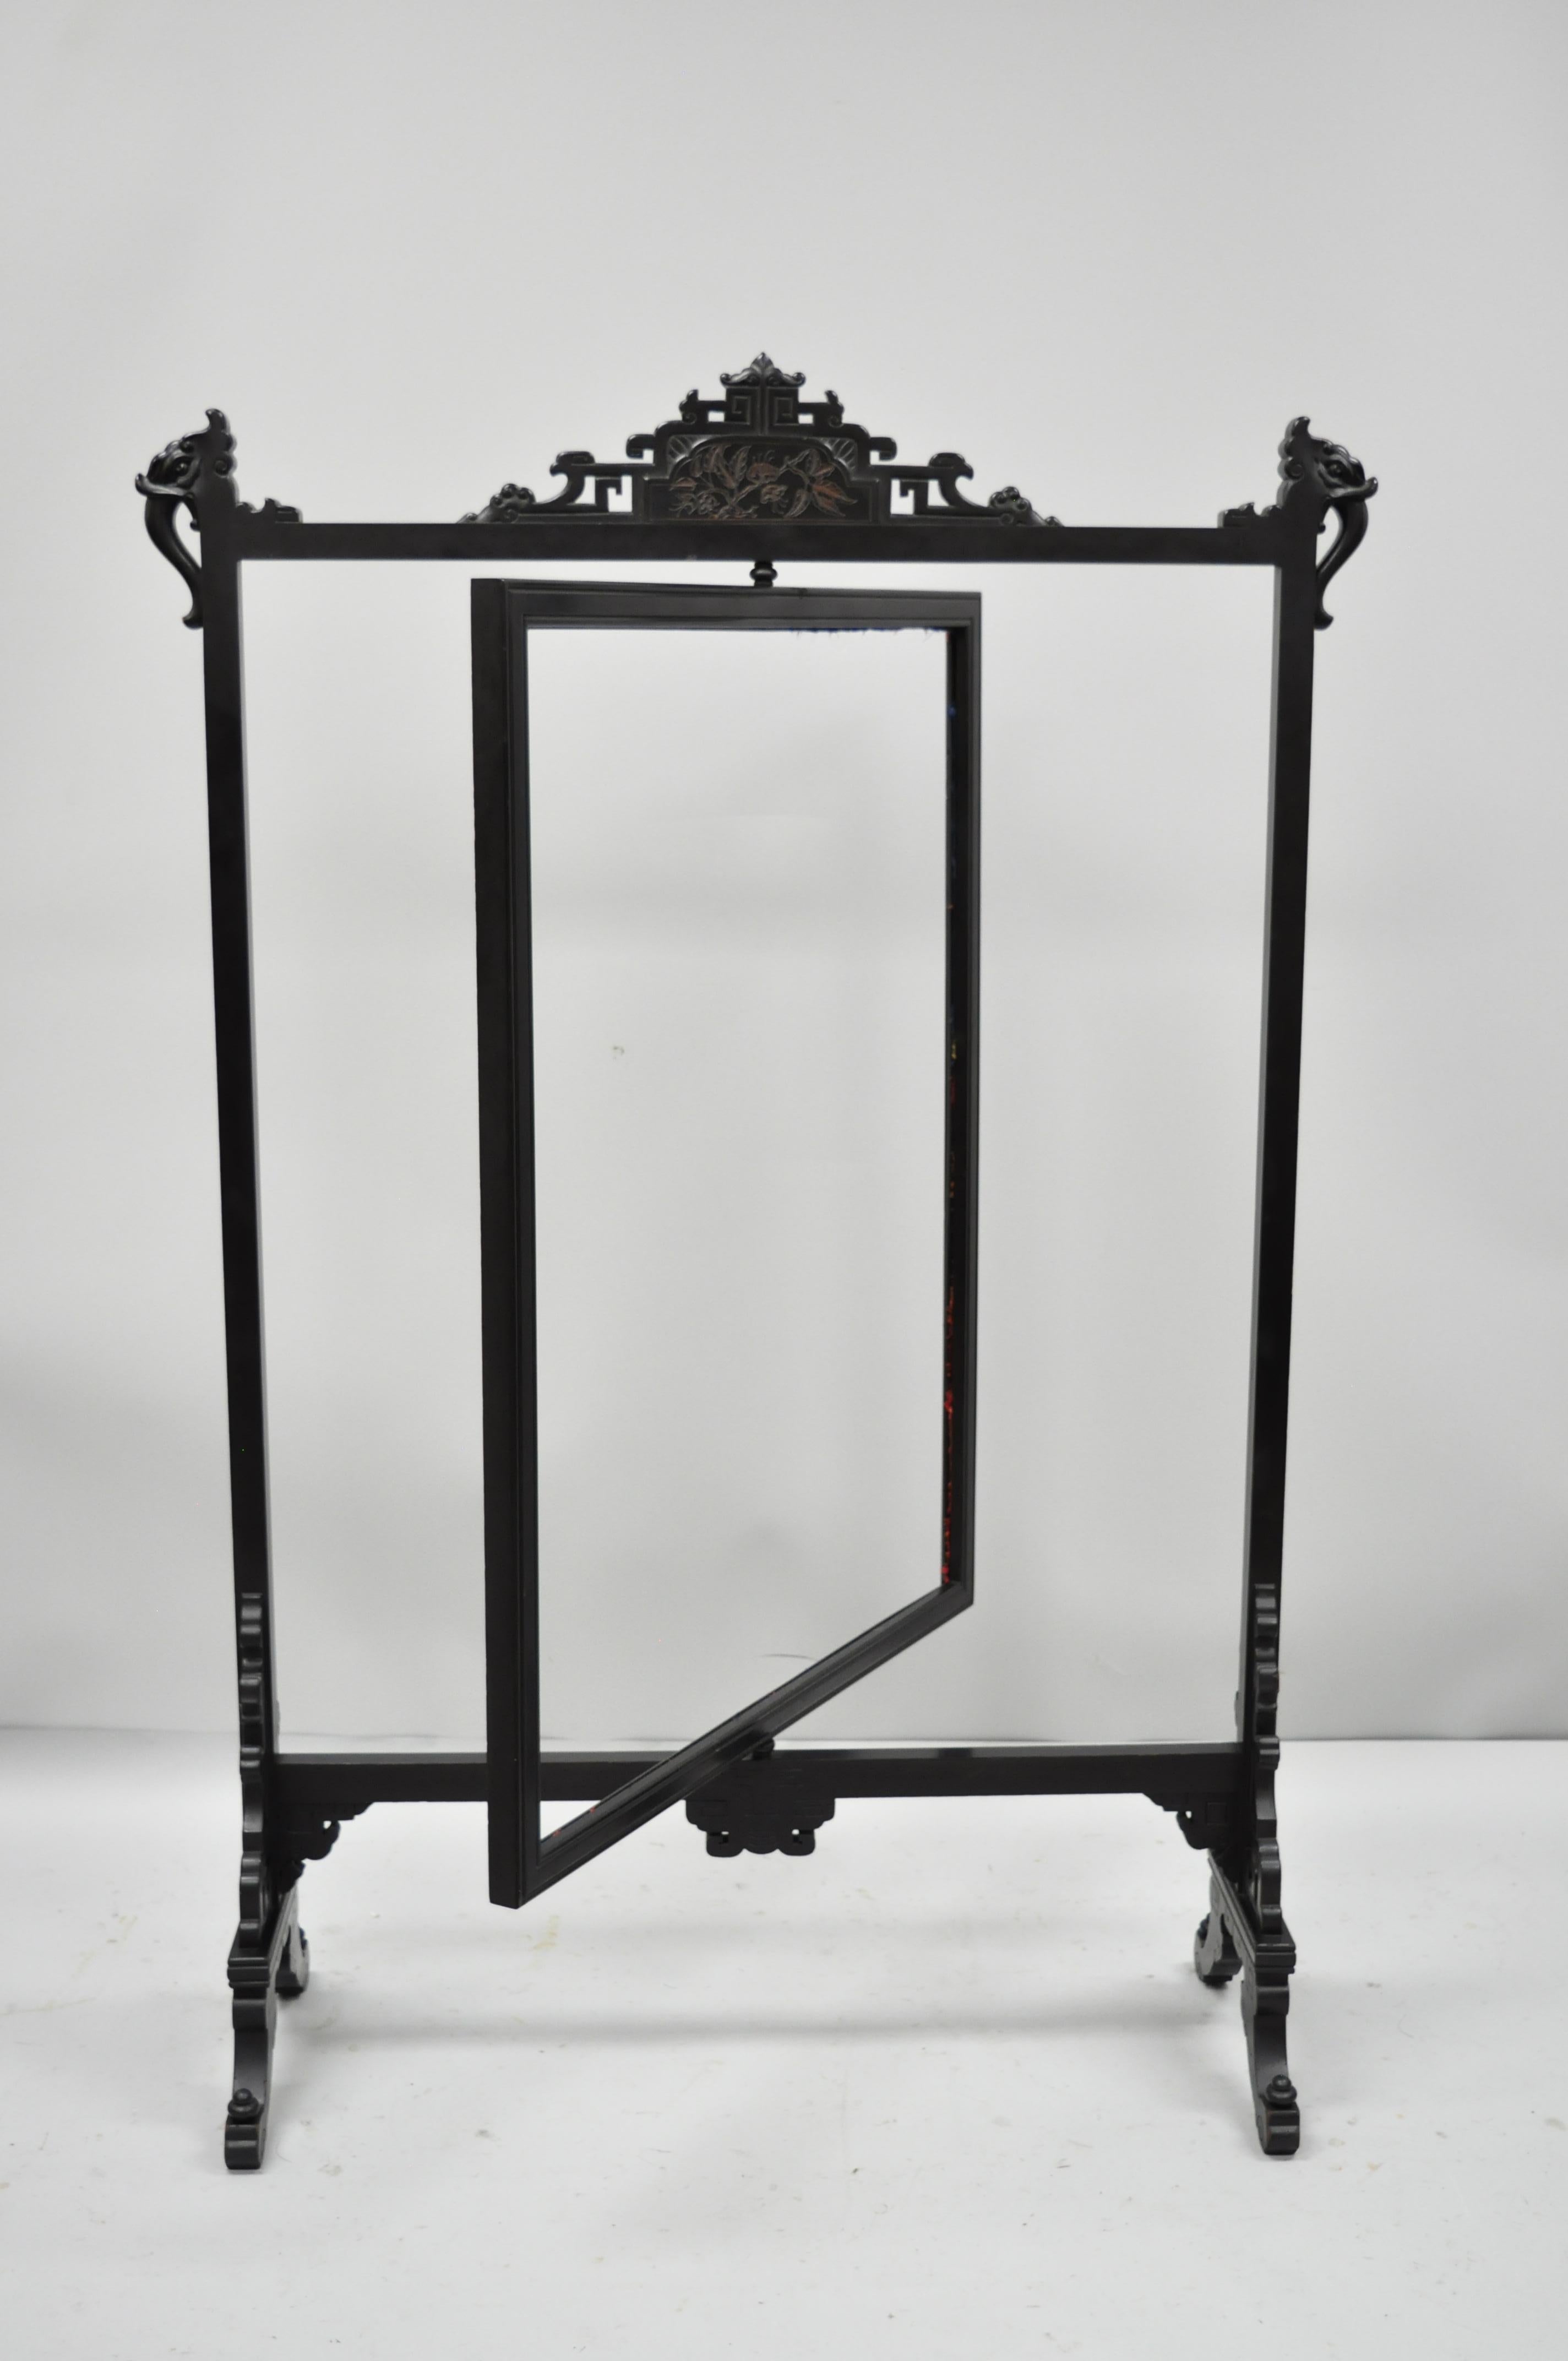 Antique Victorian ebonized oriental revolving firescreen. Item features revolving centre panel (to be reupholstered), open pediment and base, ebonized finish, solid wood frame, very nice antique item, circa early 20th century. Measurements: 51